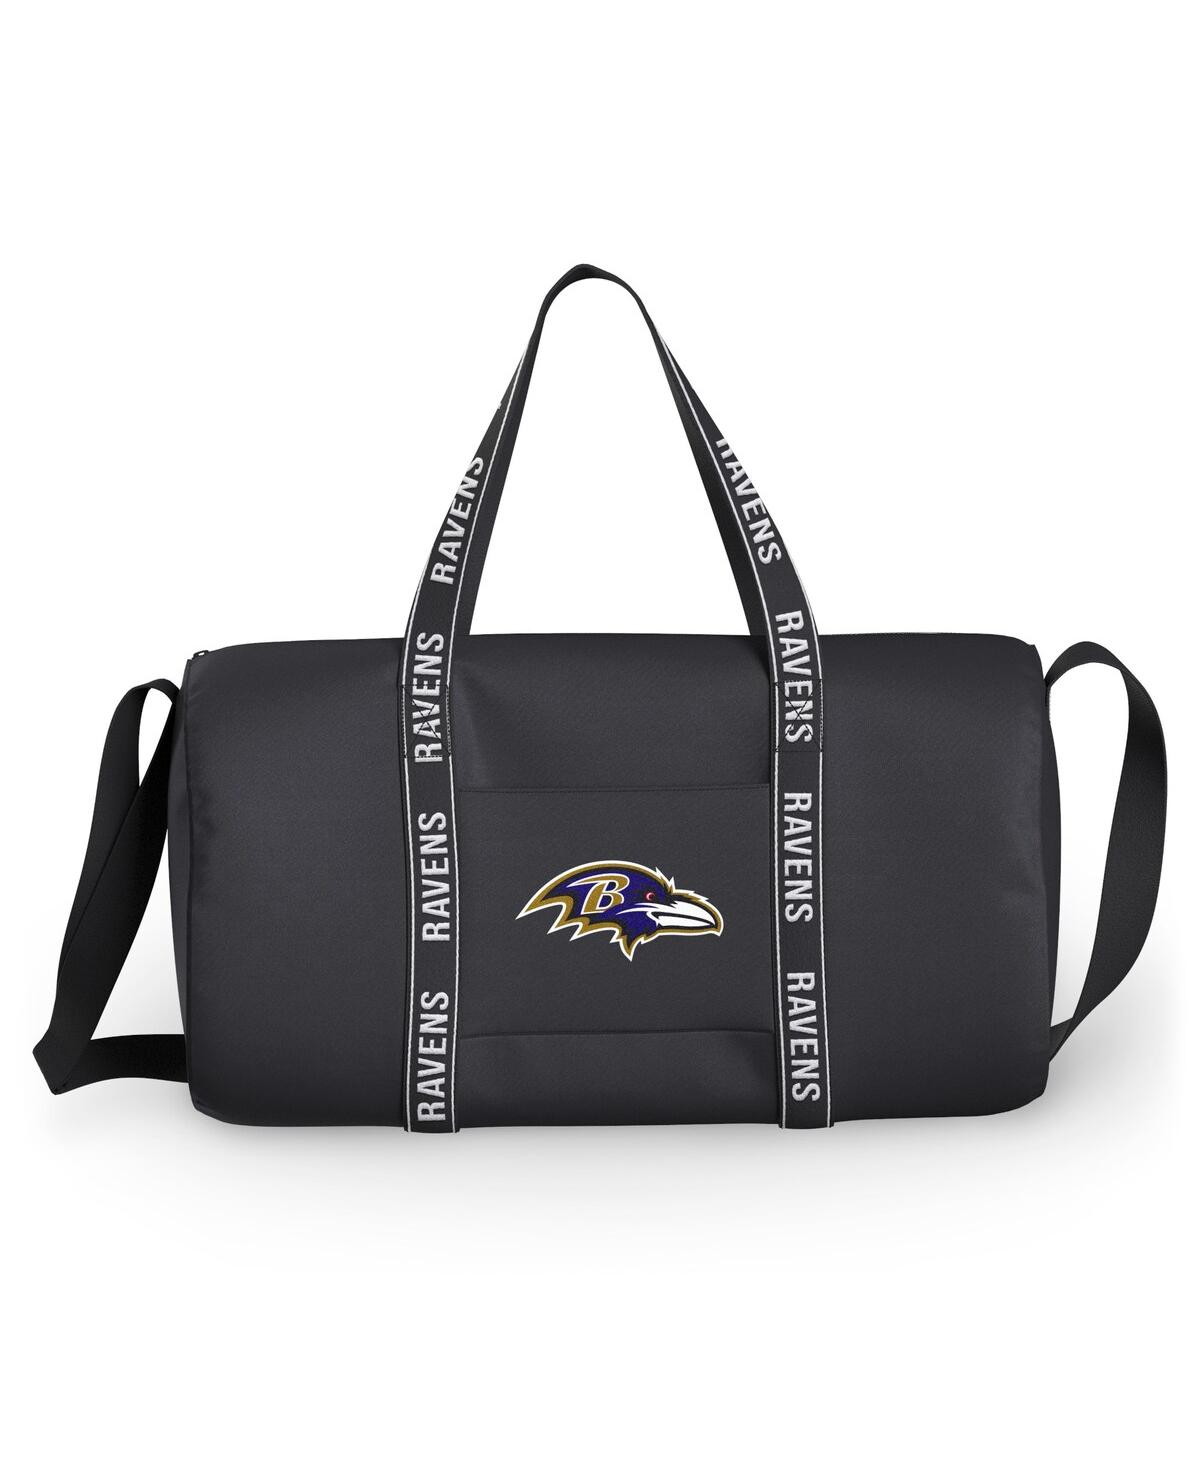 Men's and Women's Wear by Erin Andrews Baltimore Ravens Gym Duffle Bag - Black